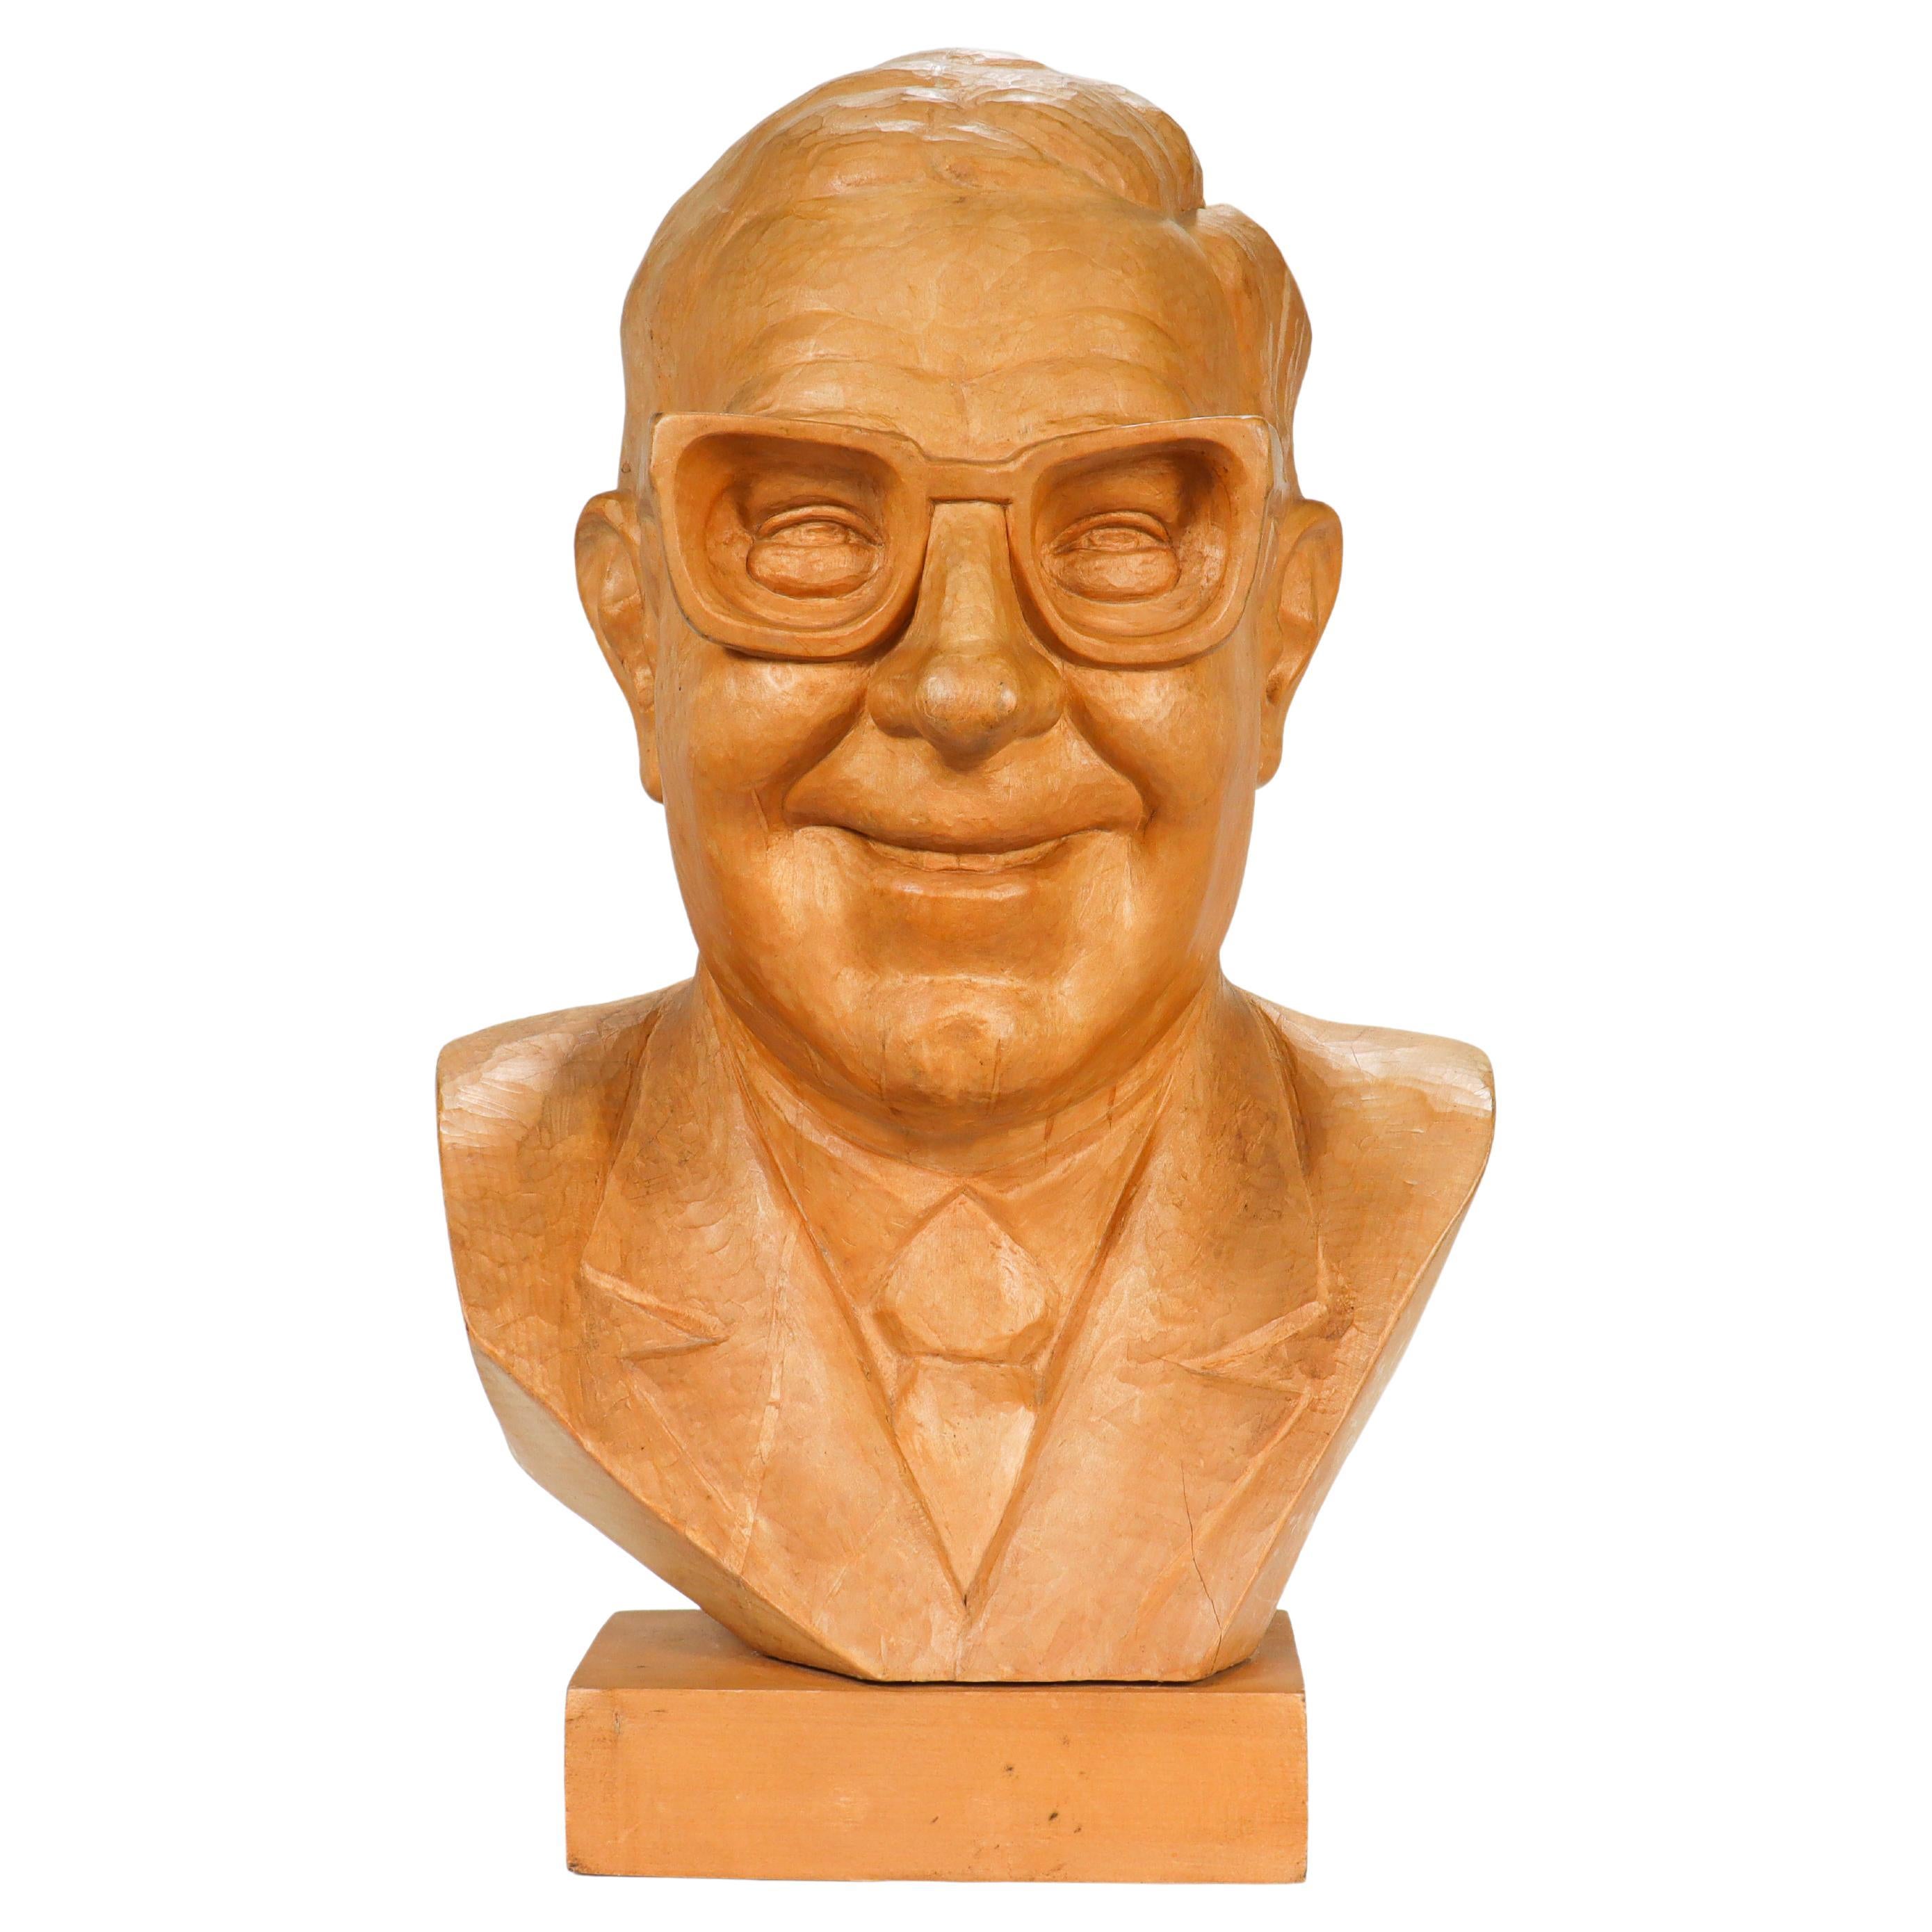 Mid-Century Carved Wooden Bust or Sculpture of a Man with Glasses by T. Stasiak